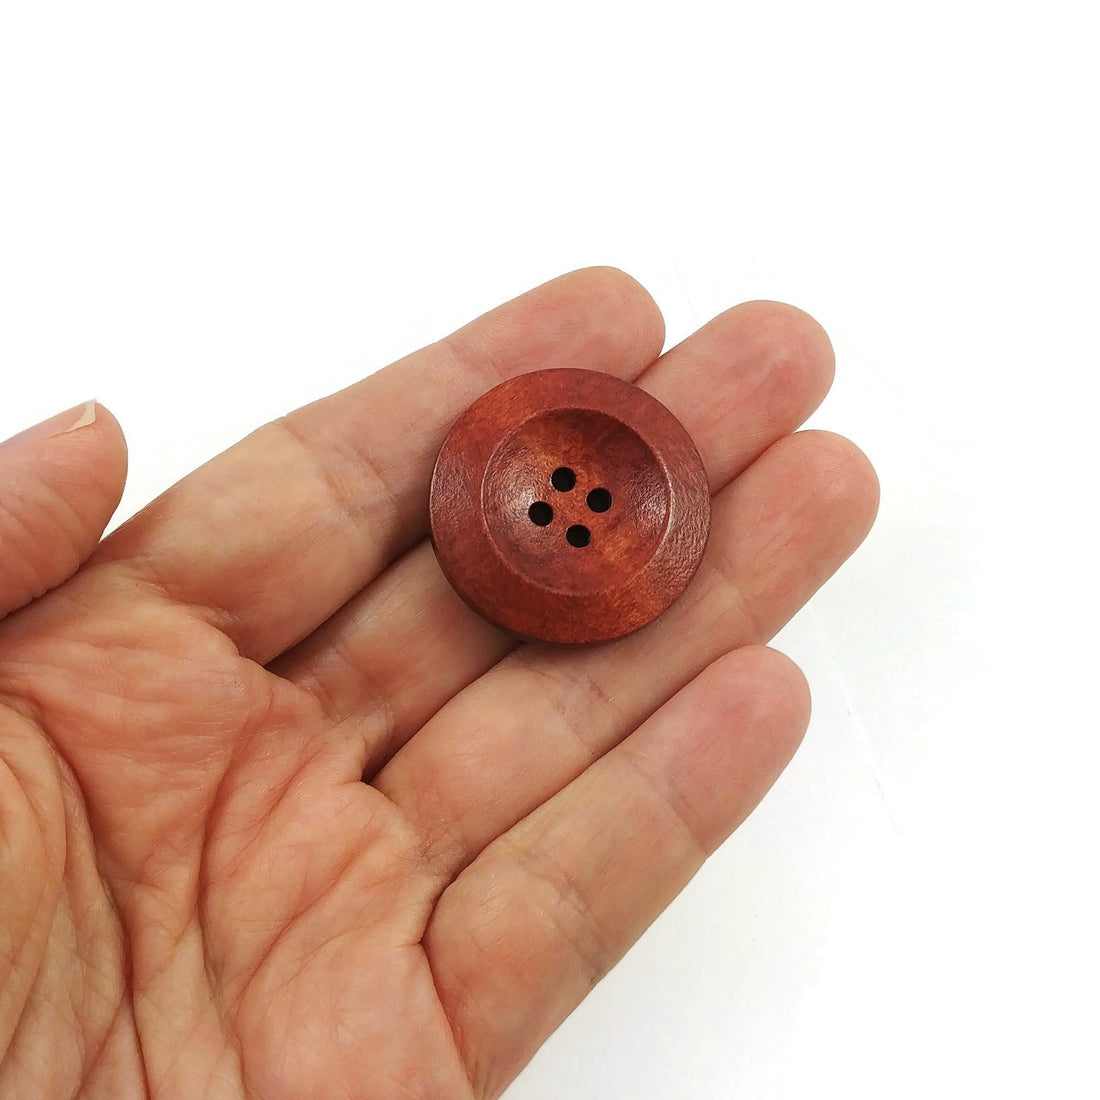 30mm wooden buttons, Red brown sewing buttons, 6 craft knitting buttons